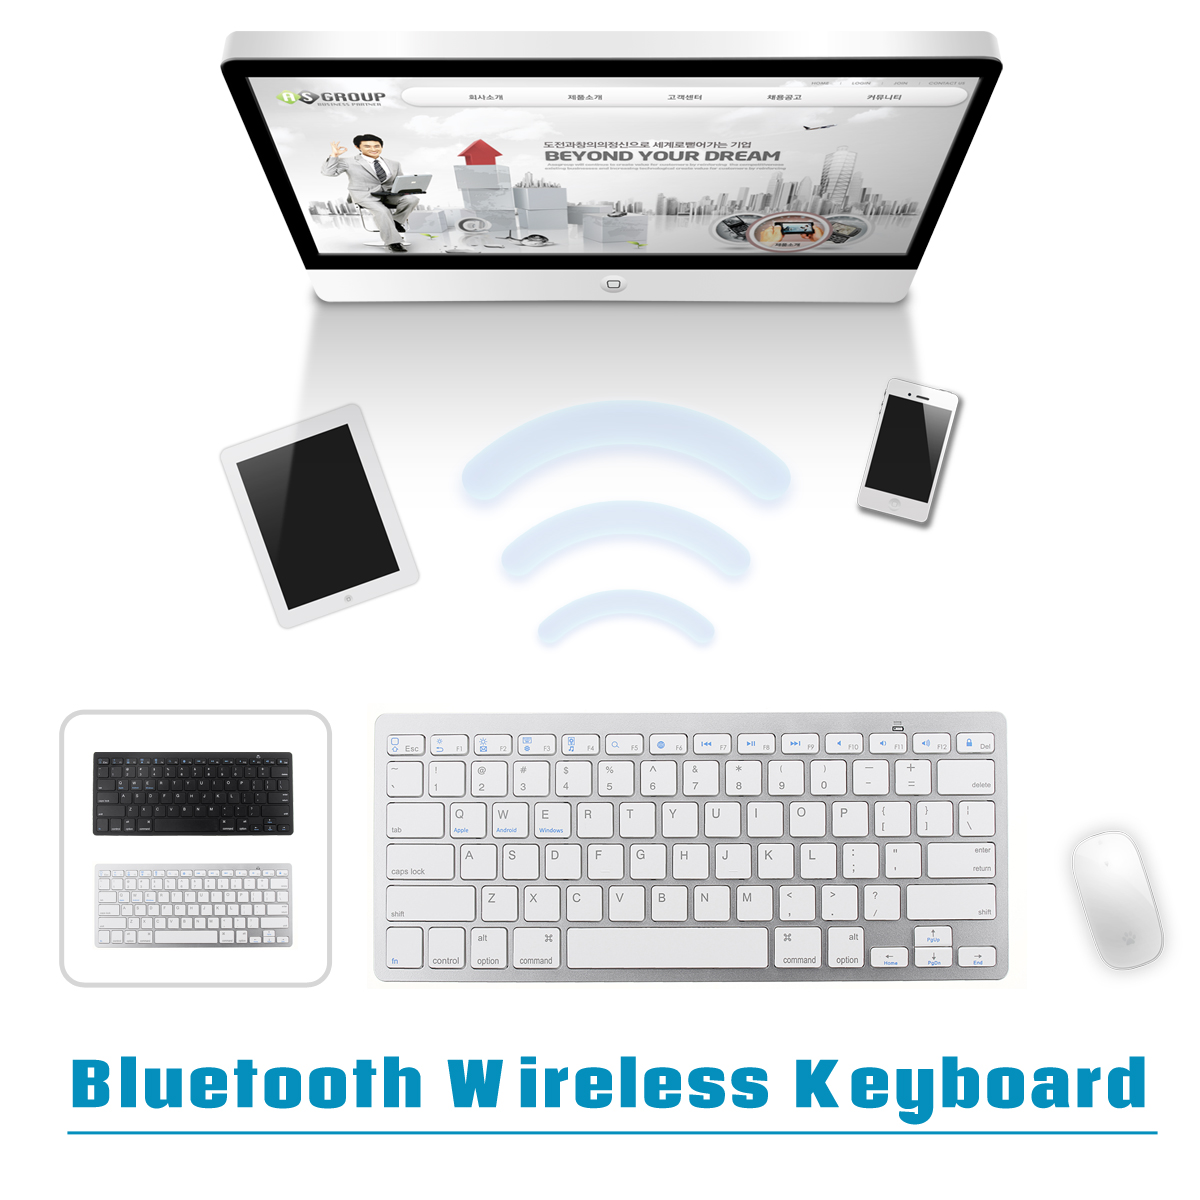 Wirelss bluetooth 3.0 Keyboard For iPhone iPad Macbook Samsung Tablet PC iOS Android Devices 13